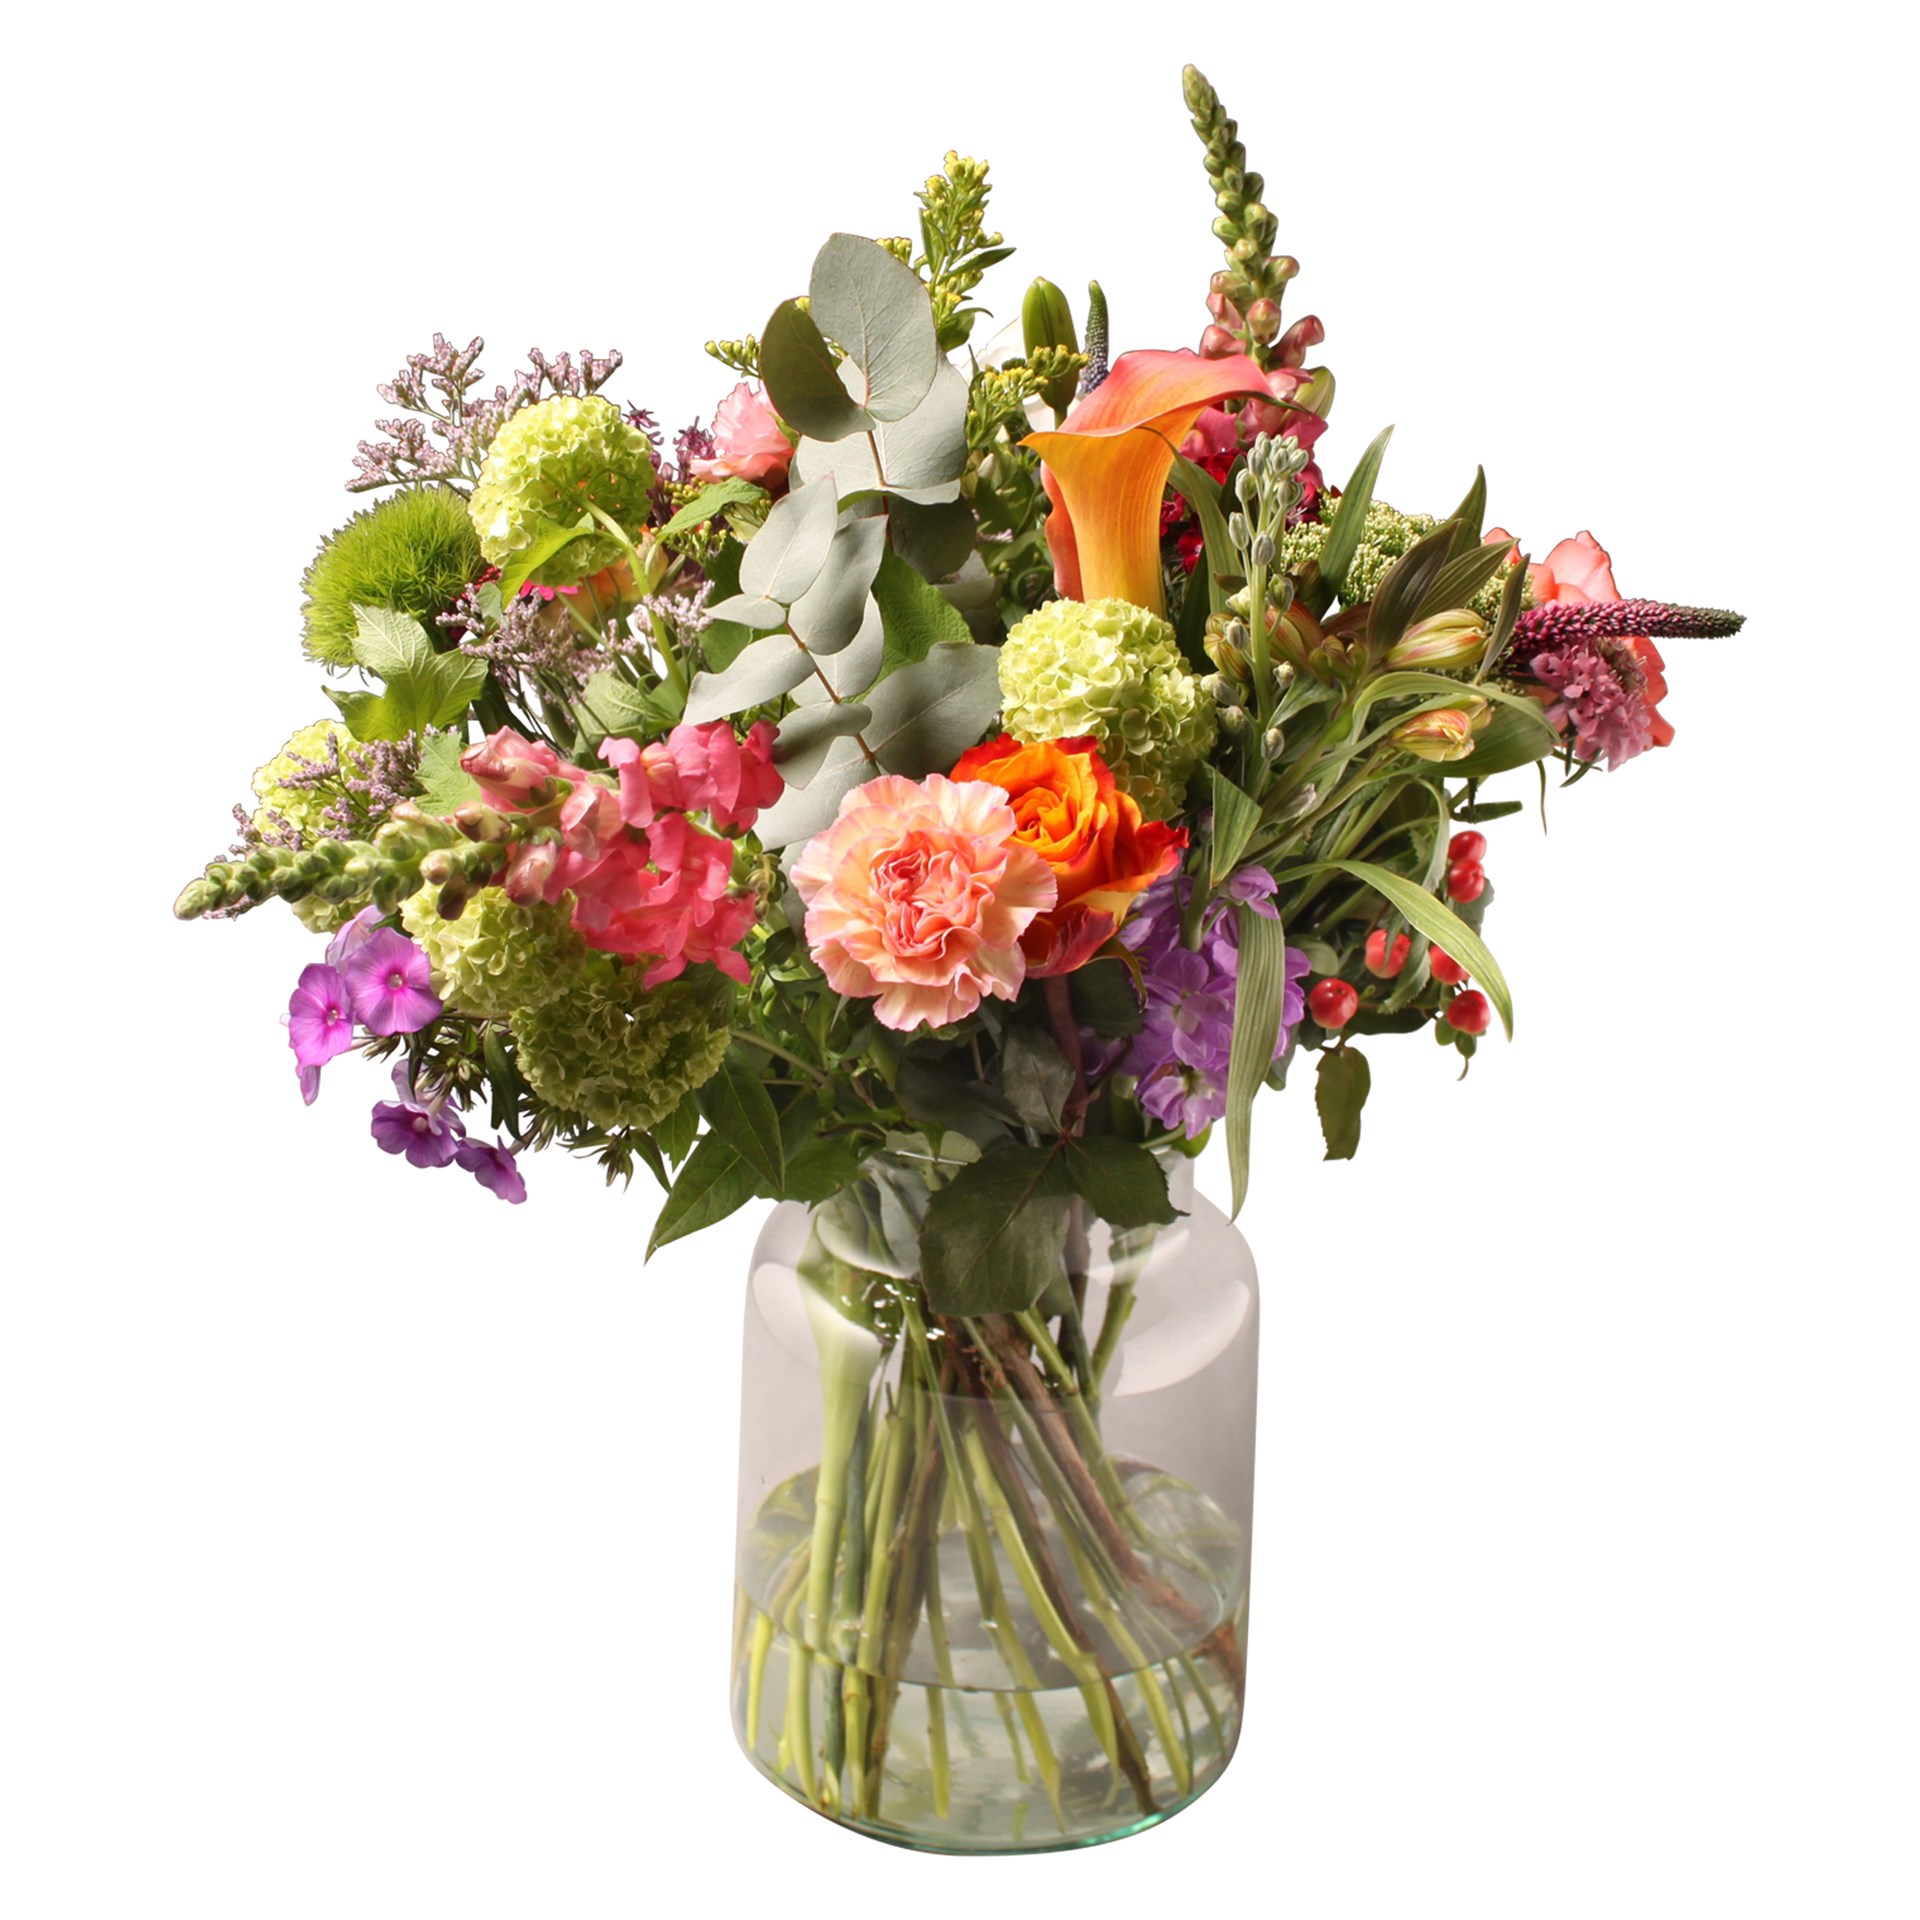 product image for Ecological bouquet with vase